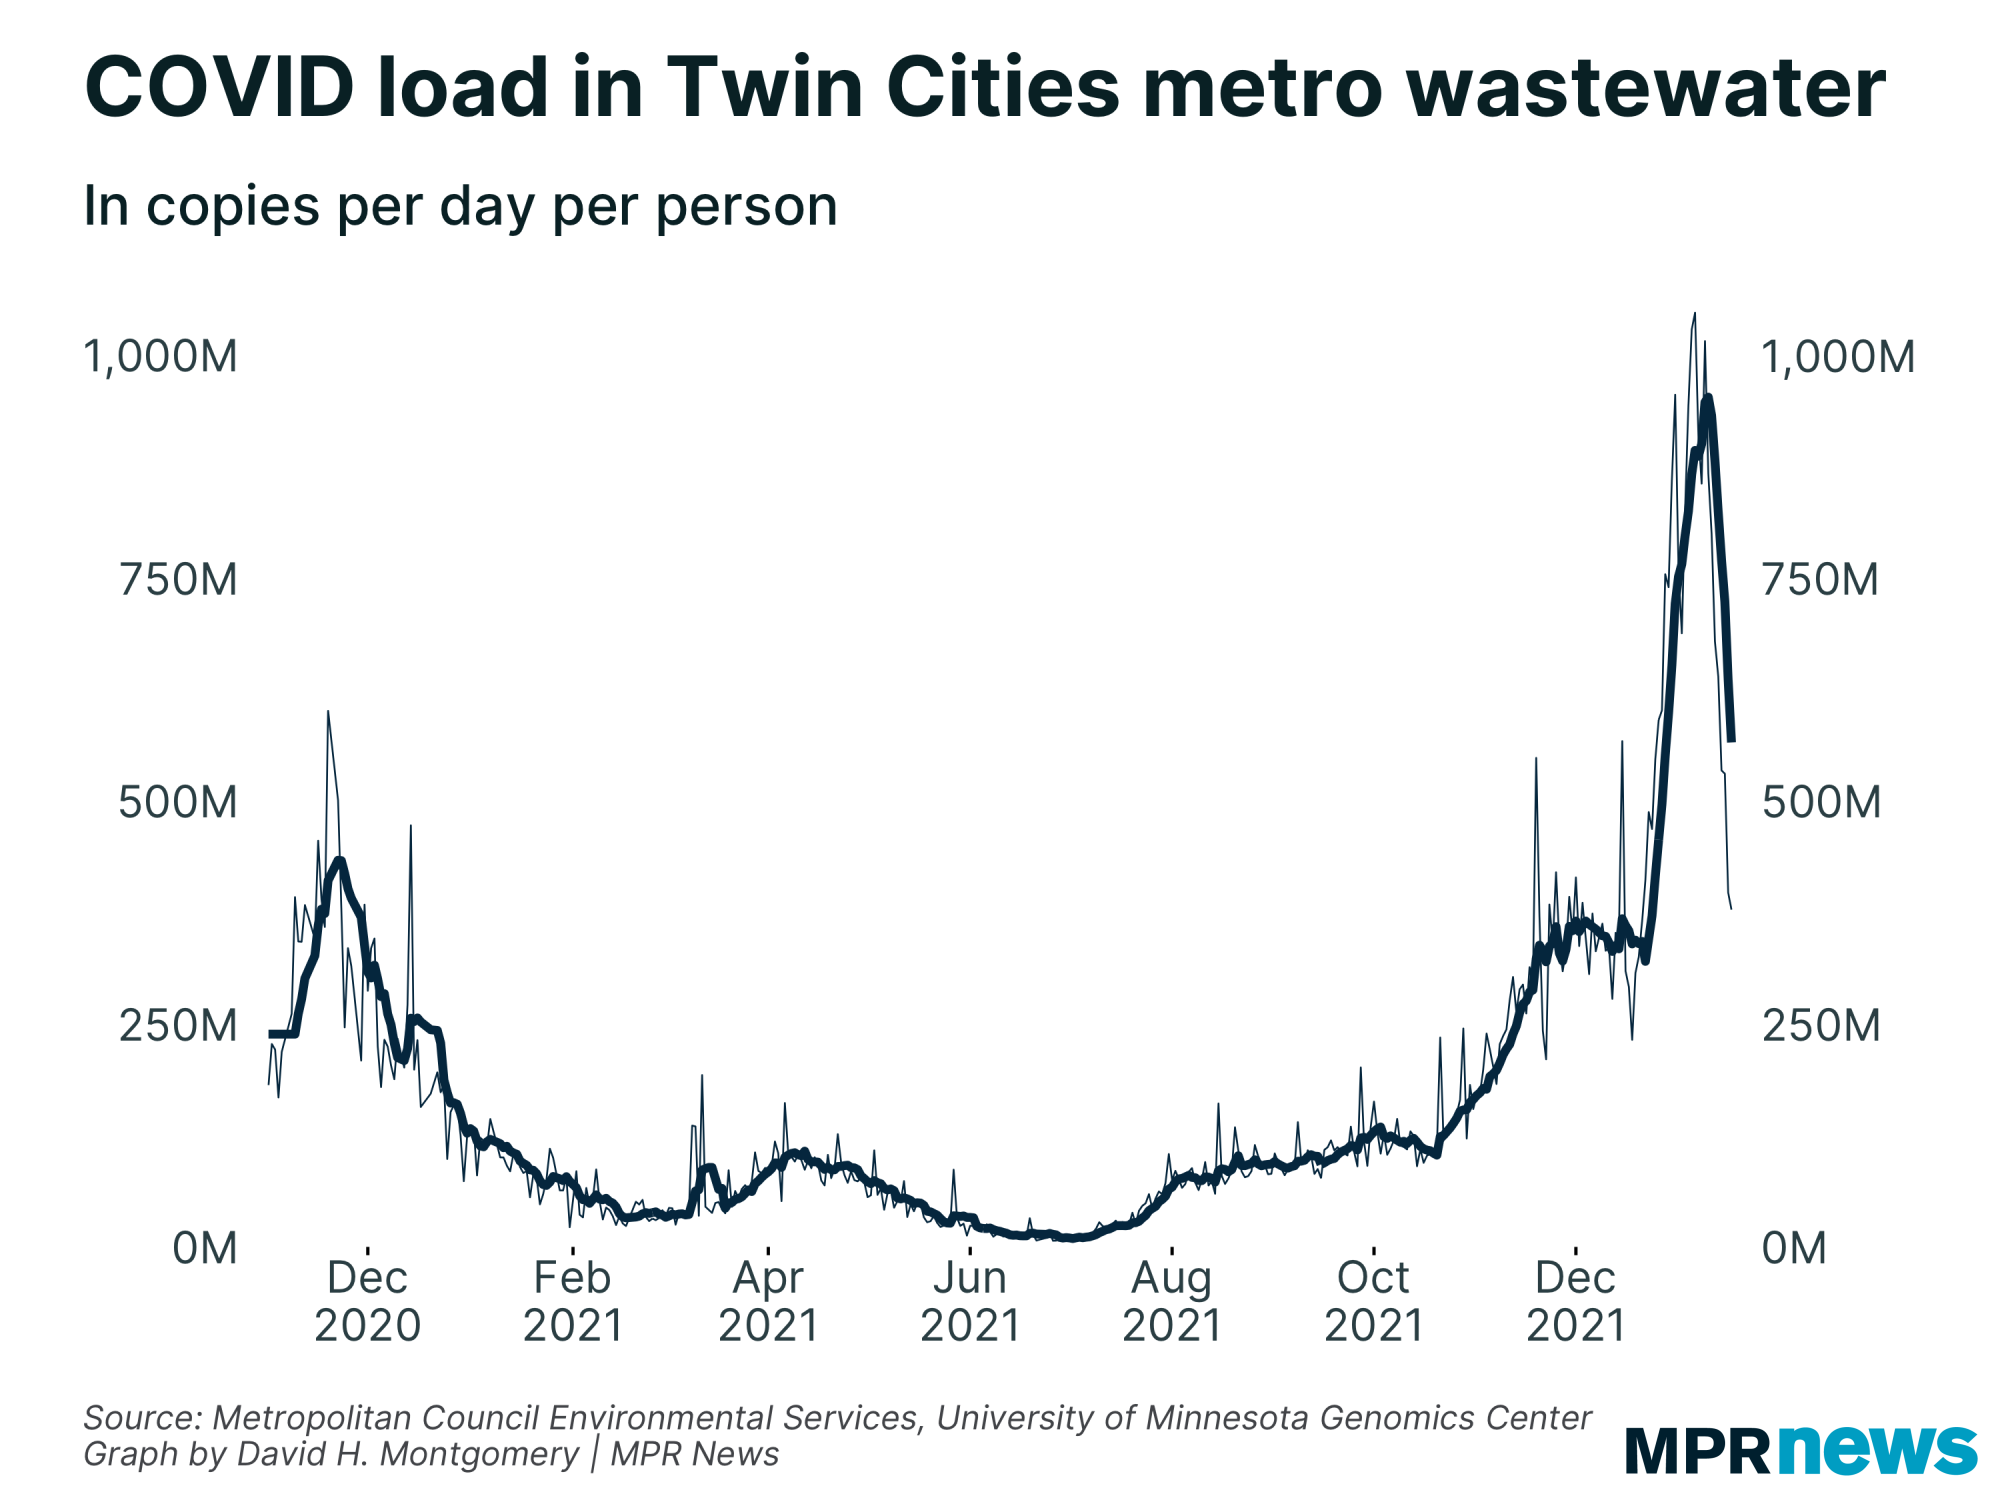 Graph of COVID-19 viral load in Twin Cities metro wastewater